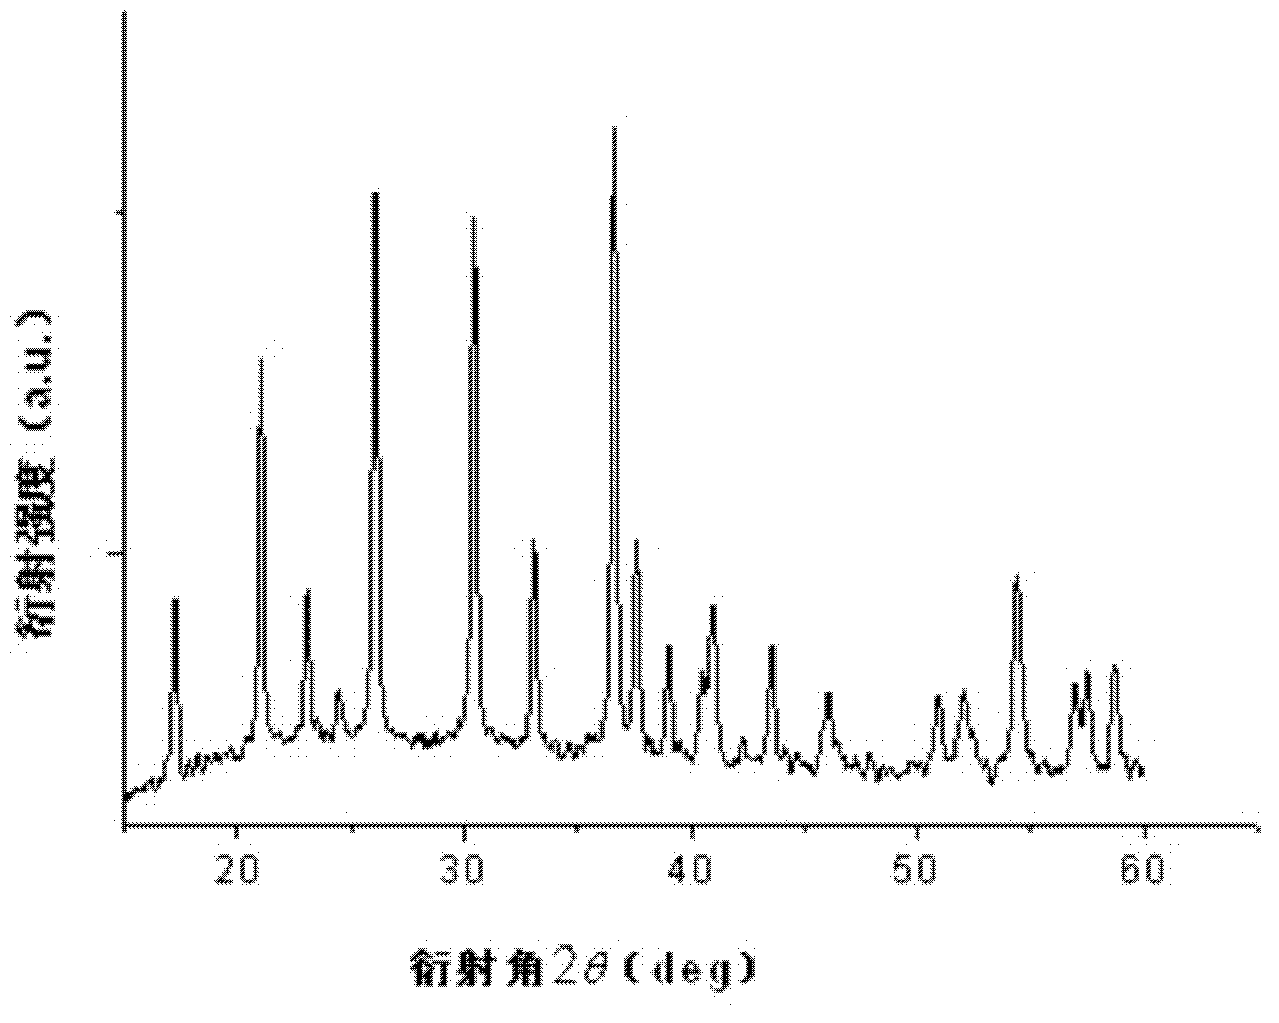 Lithium iron phosphate/PpyPy composite cathode material for boron-doped modification lithium ion battery and preparation method therefor